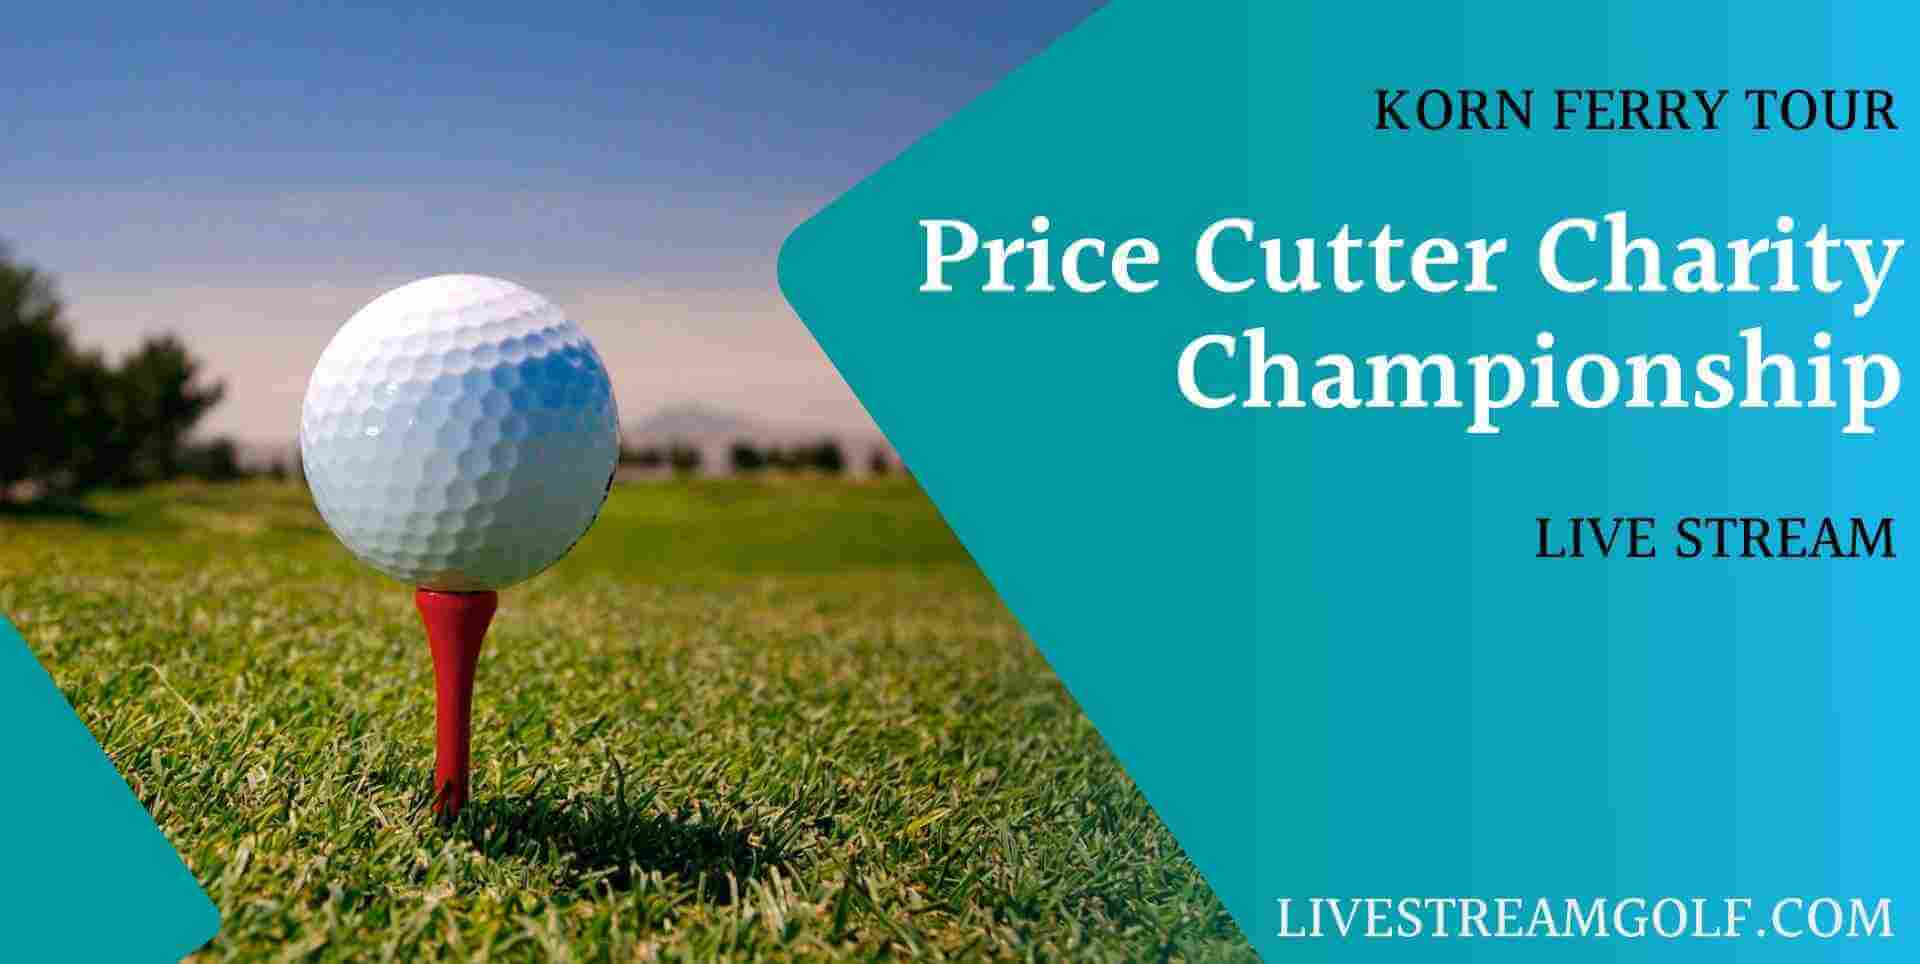 Price Cutter Charity Live Streaming Korn Ferry